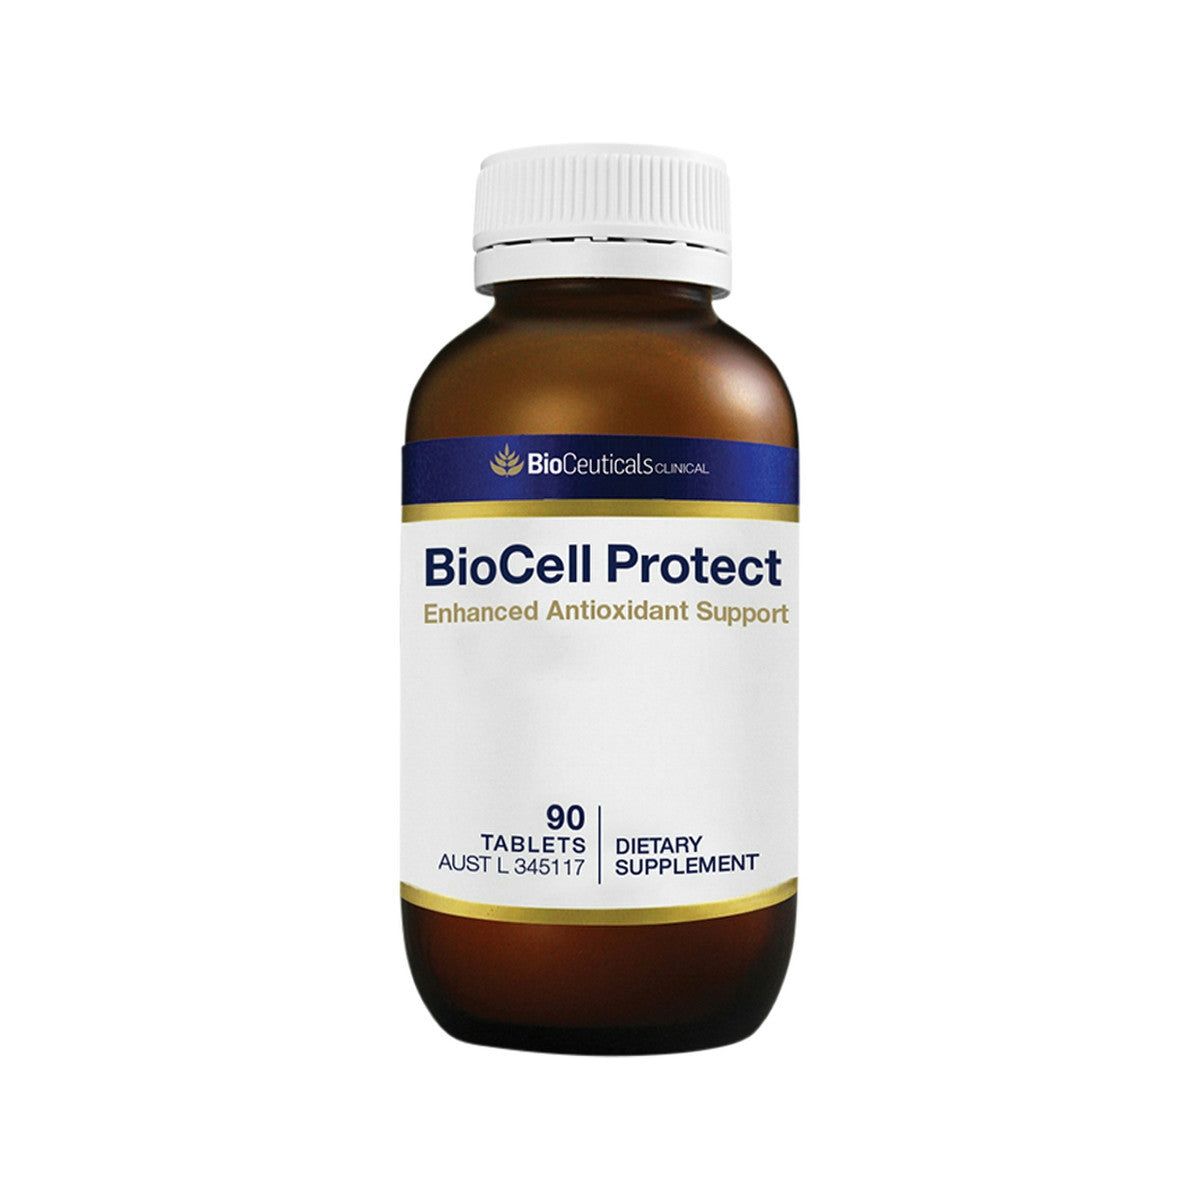 image of BioCeuticals Clinical BioCell Protect 90t on white background